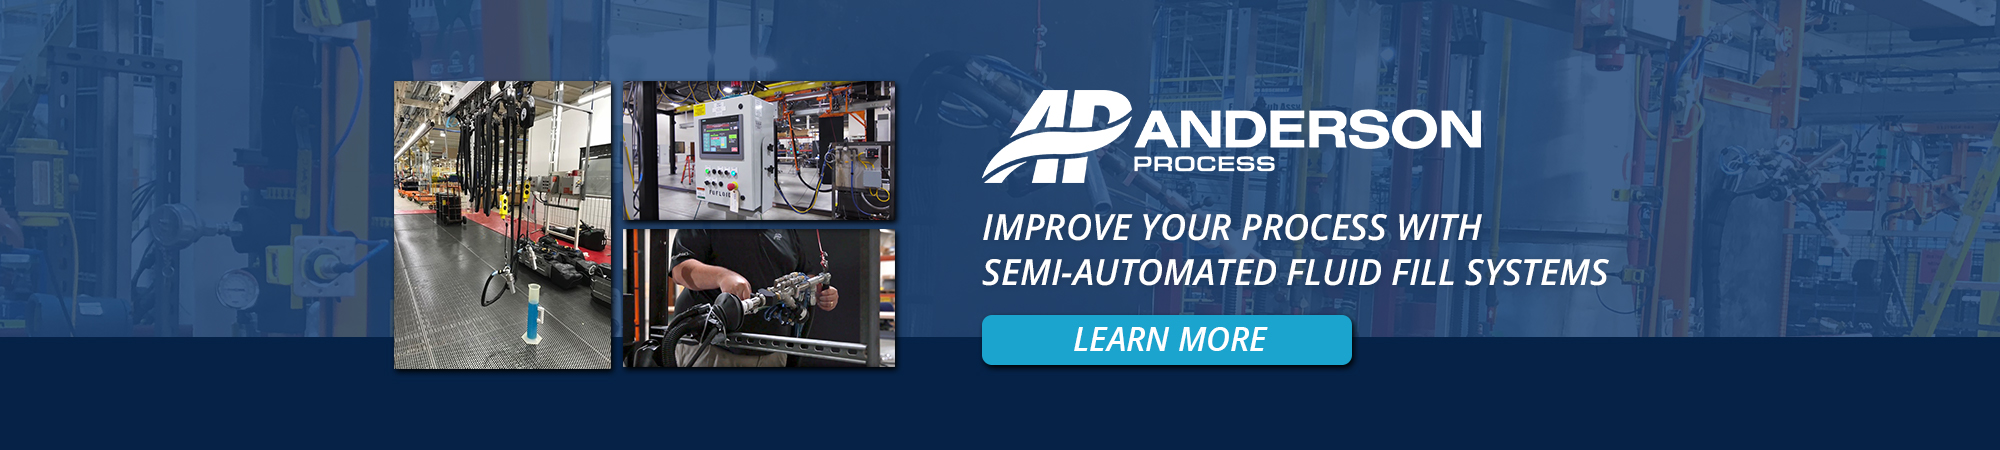 Improve your Process with Semi-Automated Fluid Fill Systems